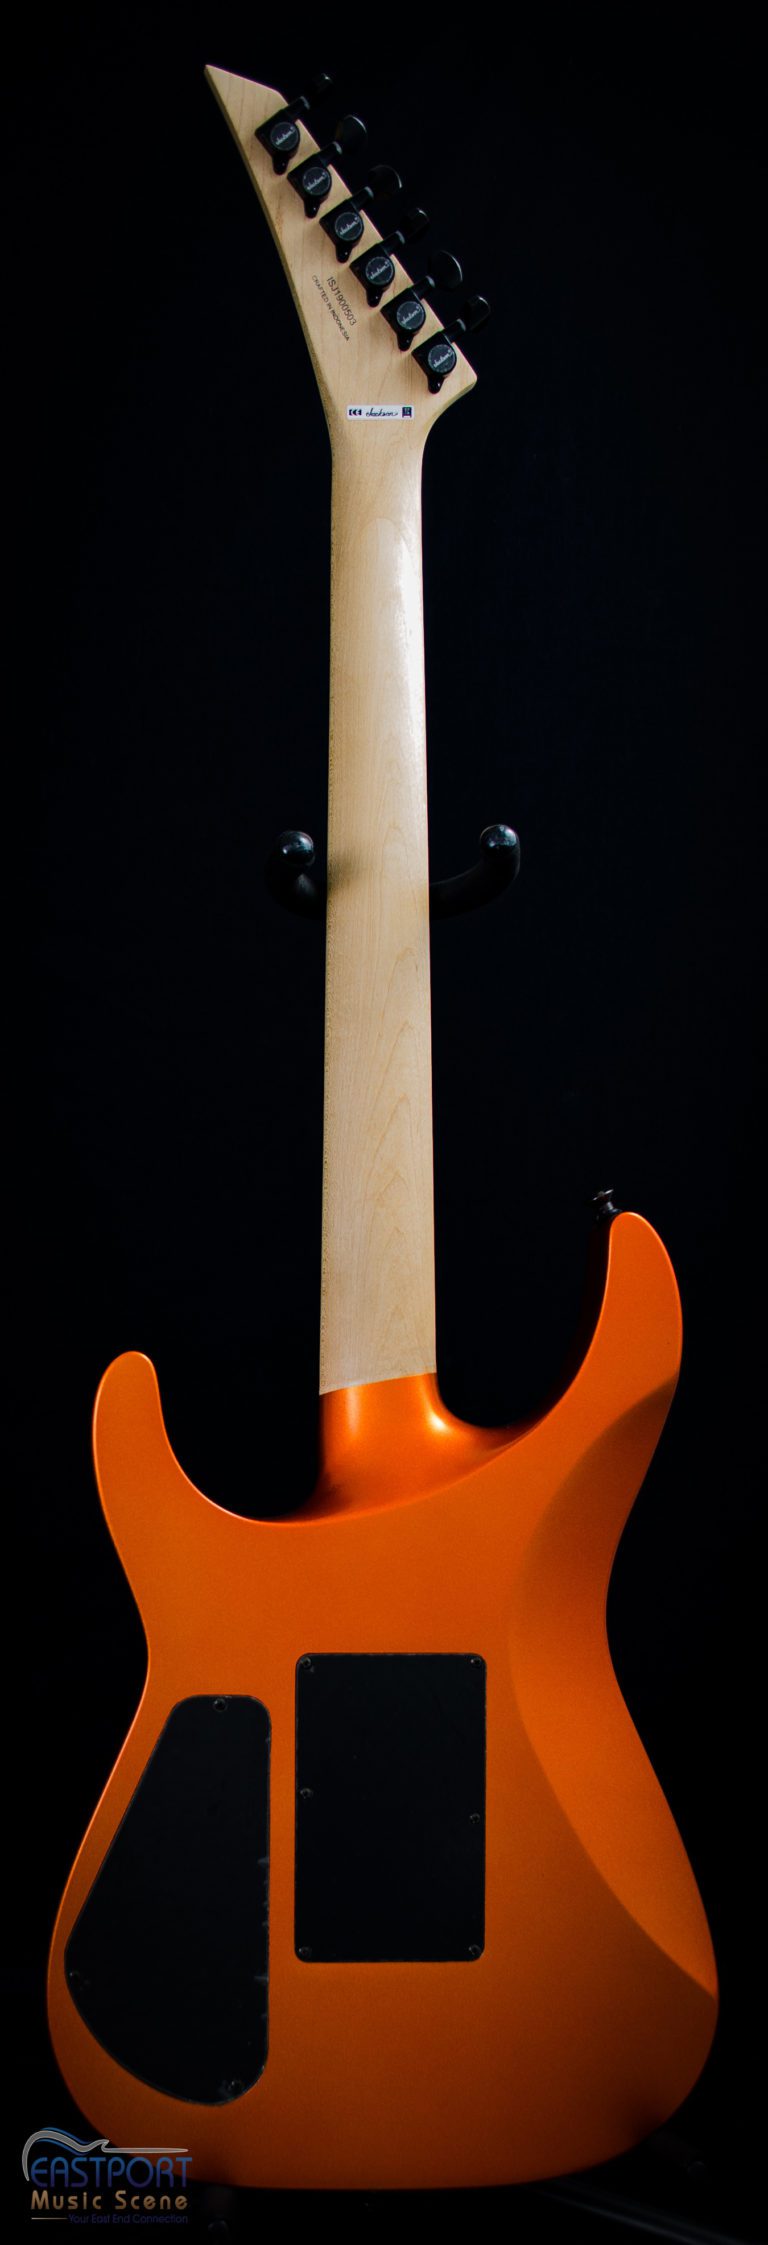 A guitar with an orange body and white neck.